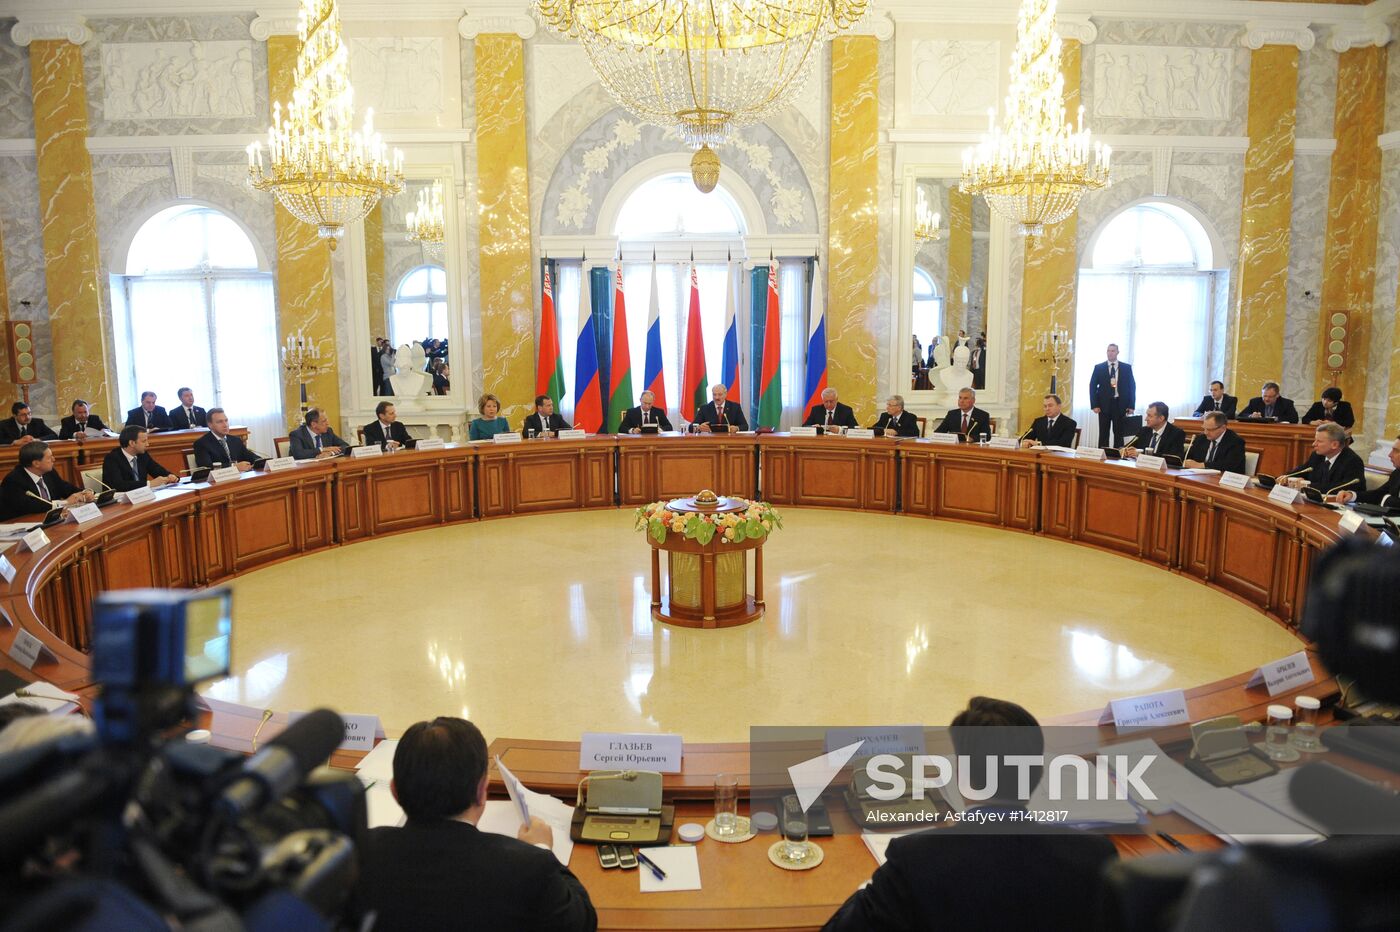 Meeting of Supreme Council of Russia-Belarus Union State